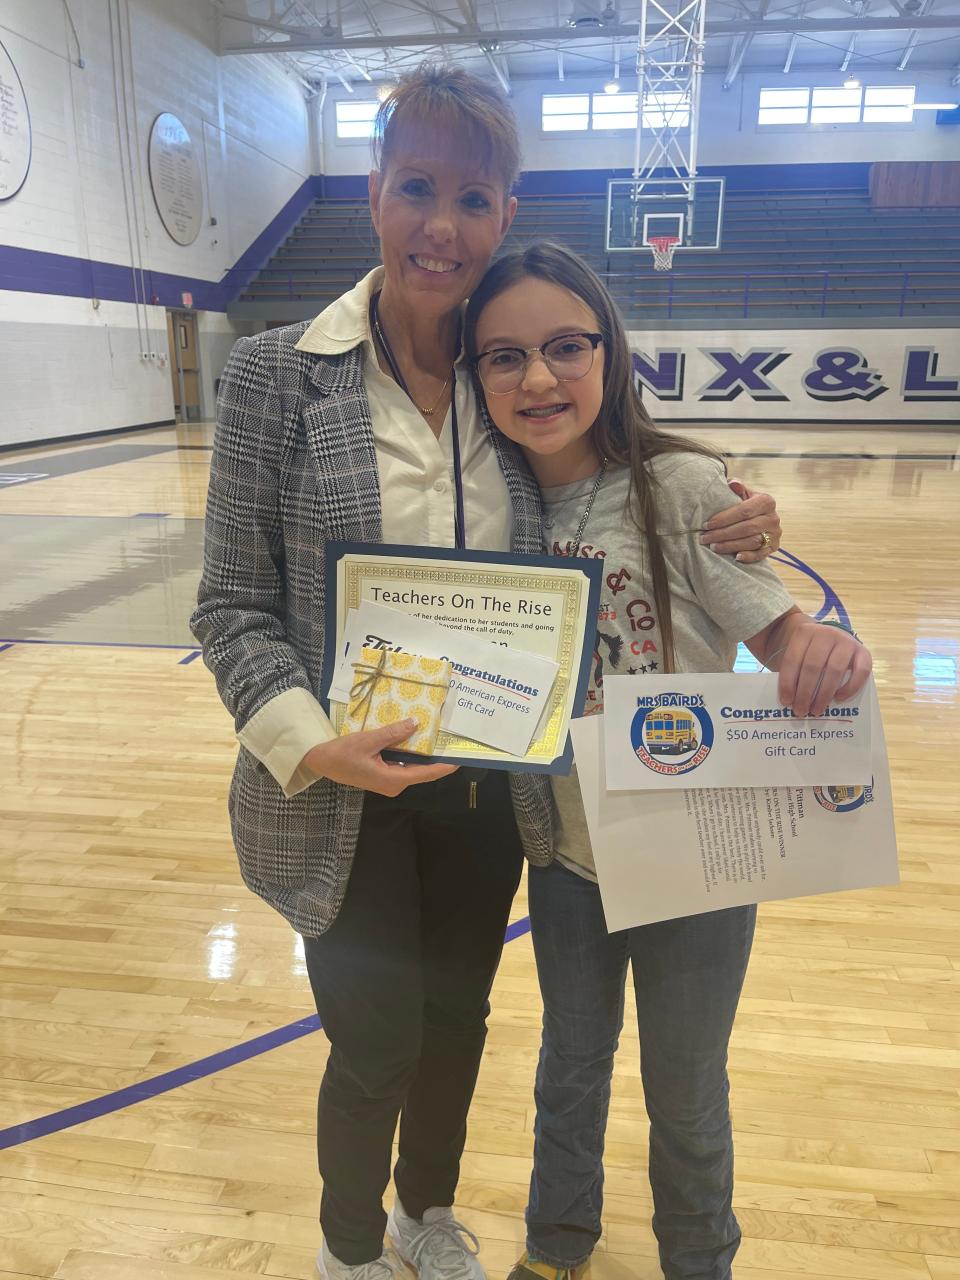 The March winners of the 11th annual Teachers On The Rise program include Julie Pittman of Spearman Junior High with Spearman ISD.